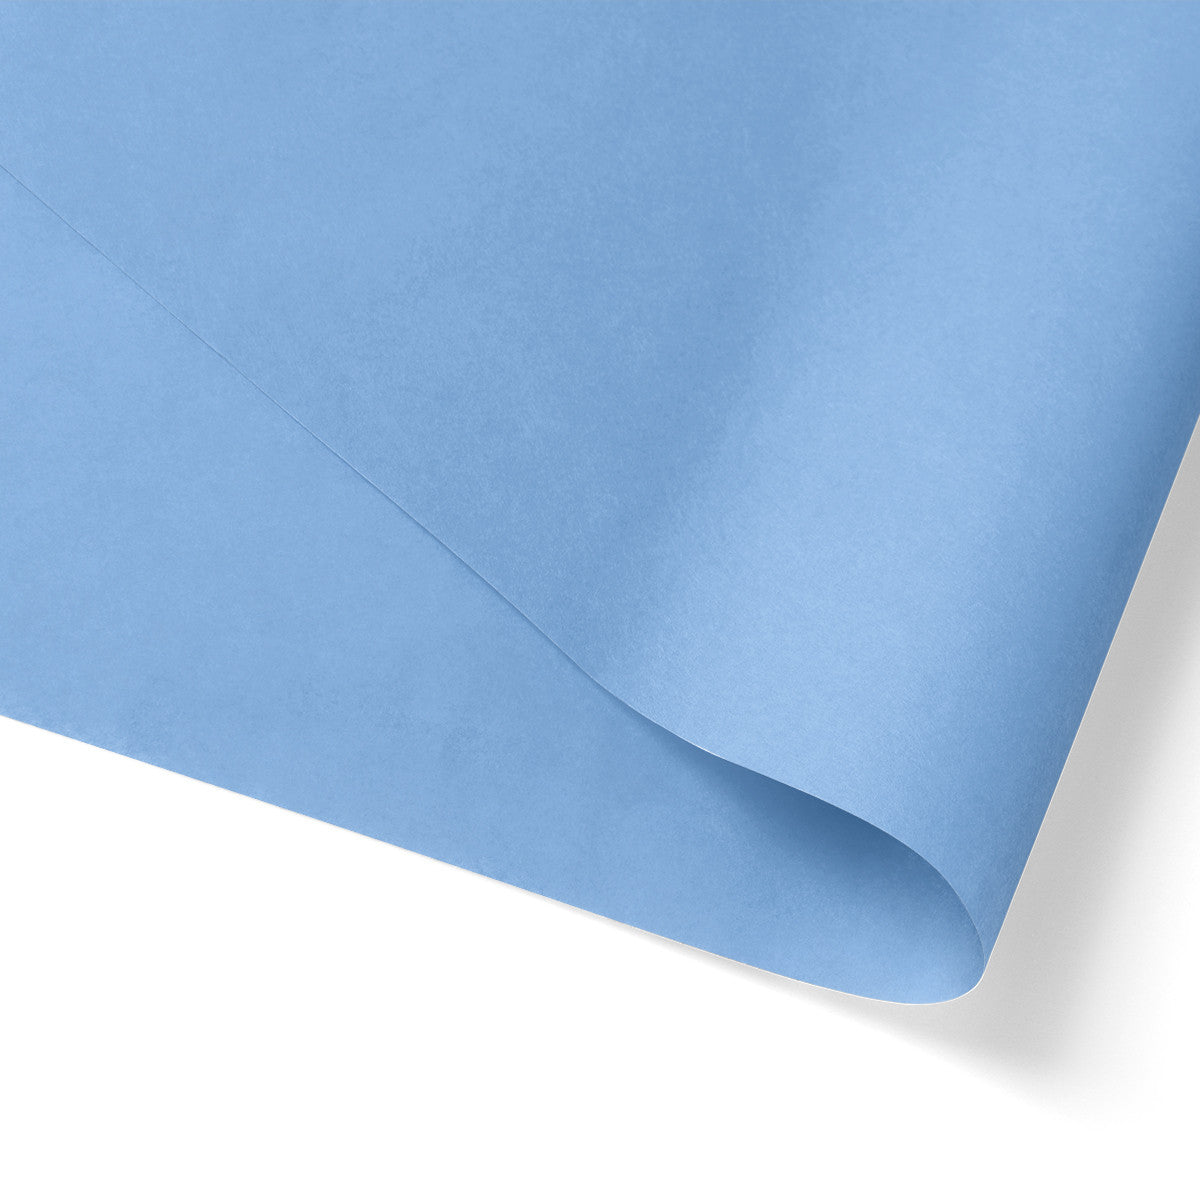 480pcs 20x30 inches Blue Solid Tissue Paper; $0.07/pc